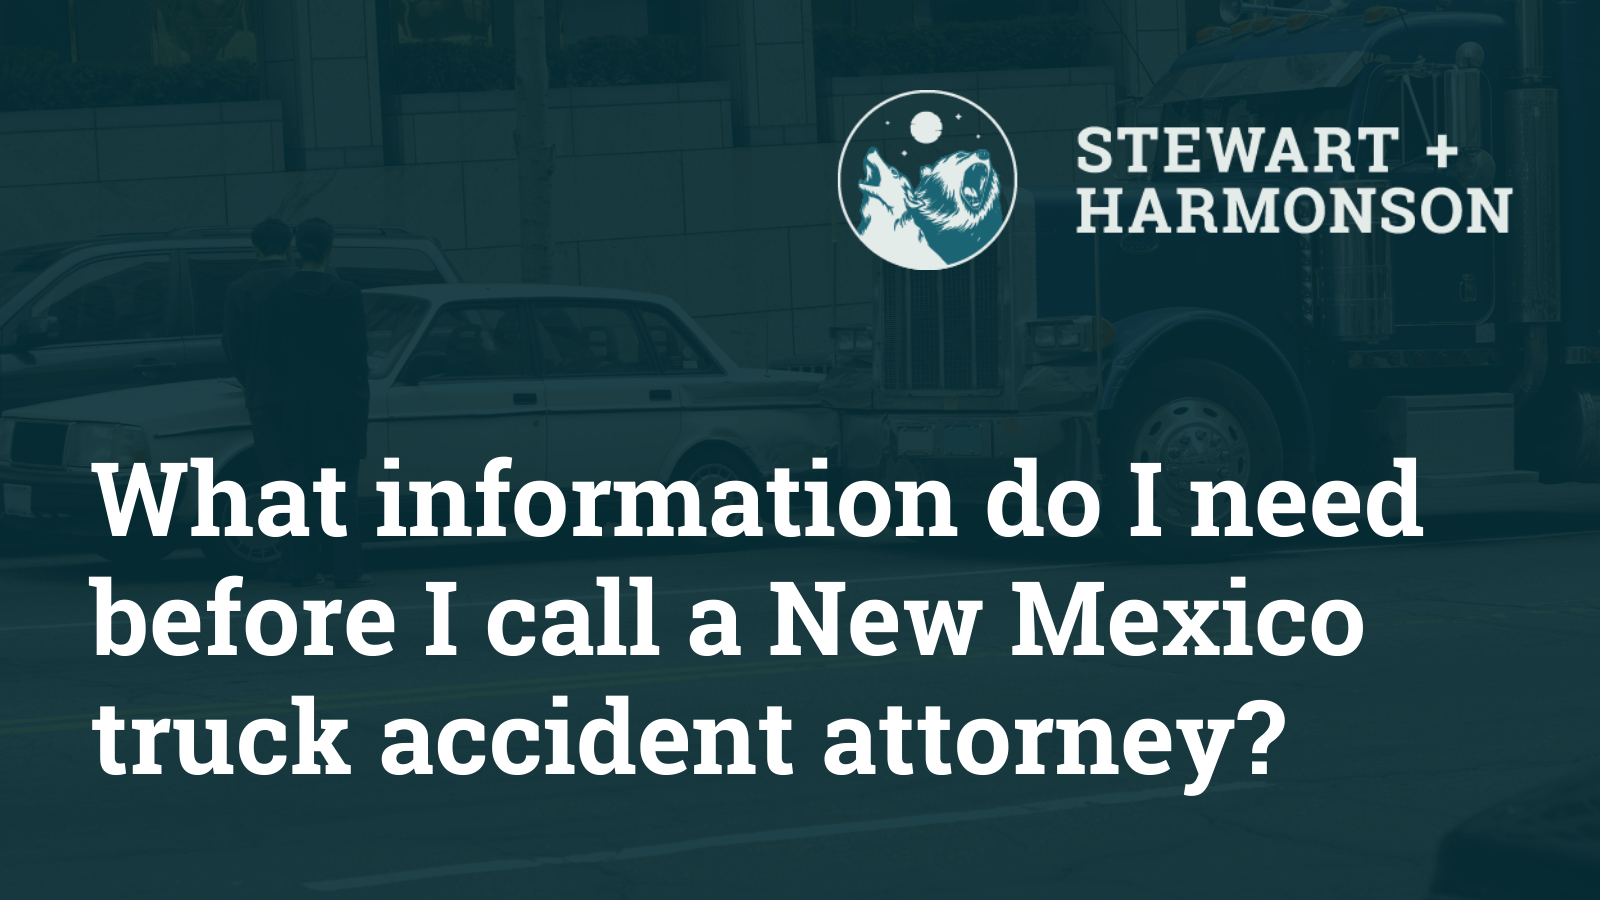 What information do I need before I call a New Mexico truck accident attorney - Stewart Harmonson Law Firm - New Mexico